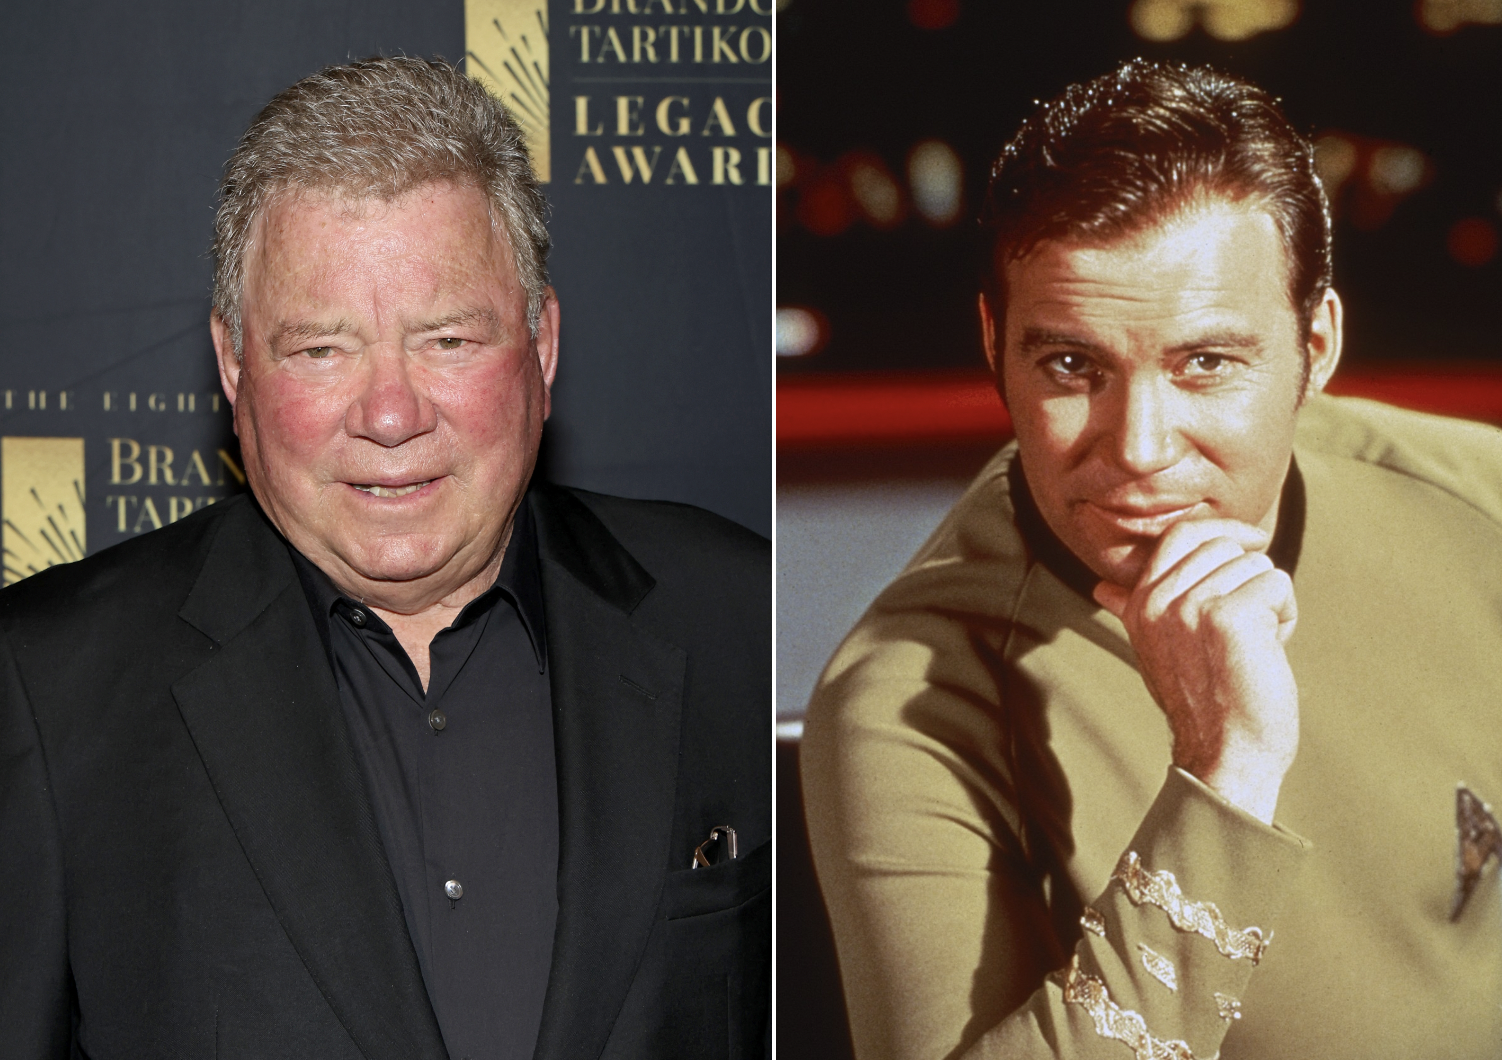 93-Year-Old William Shatner ‘Might Consider’ Returning as Captain Kirk in New ‘Star Trek’ Project Through De-Aging...